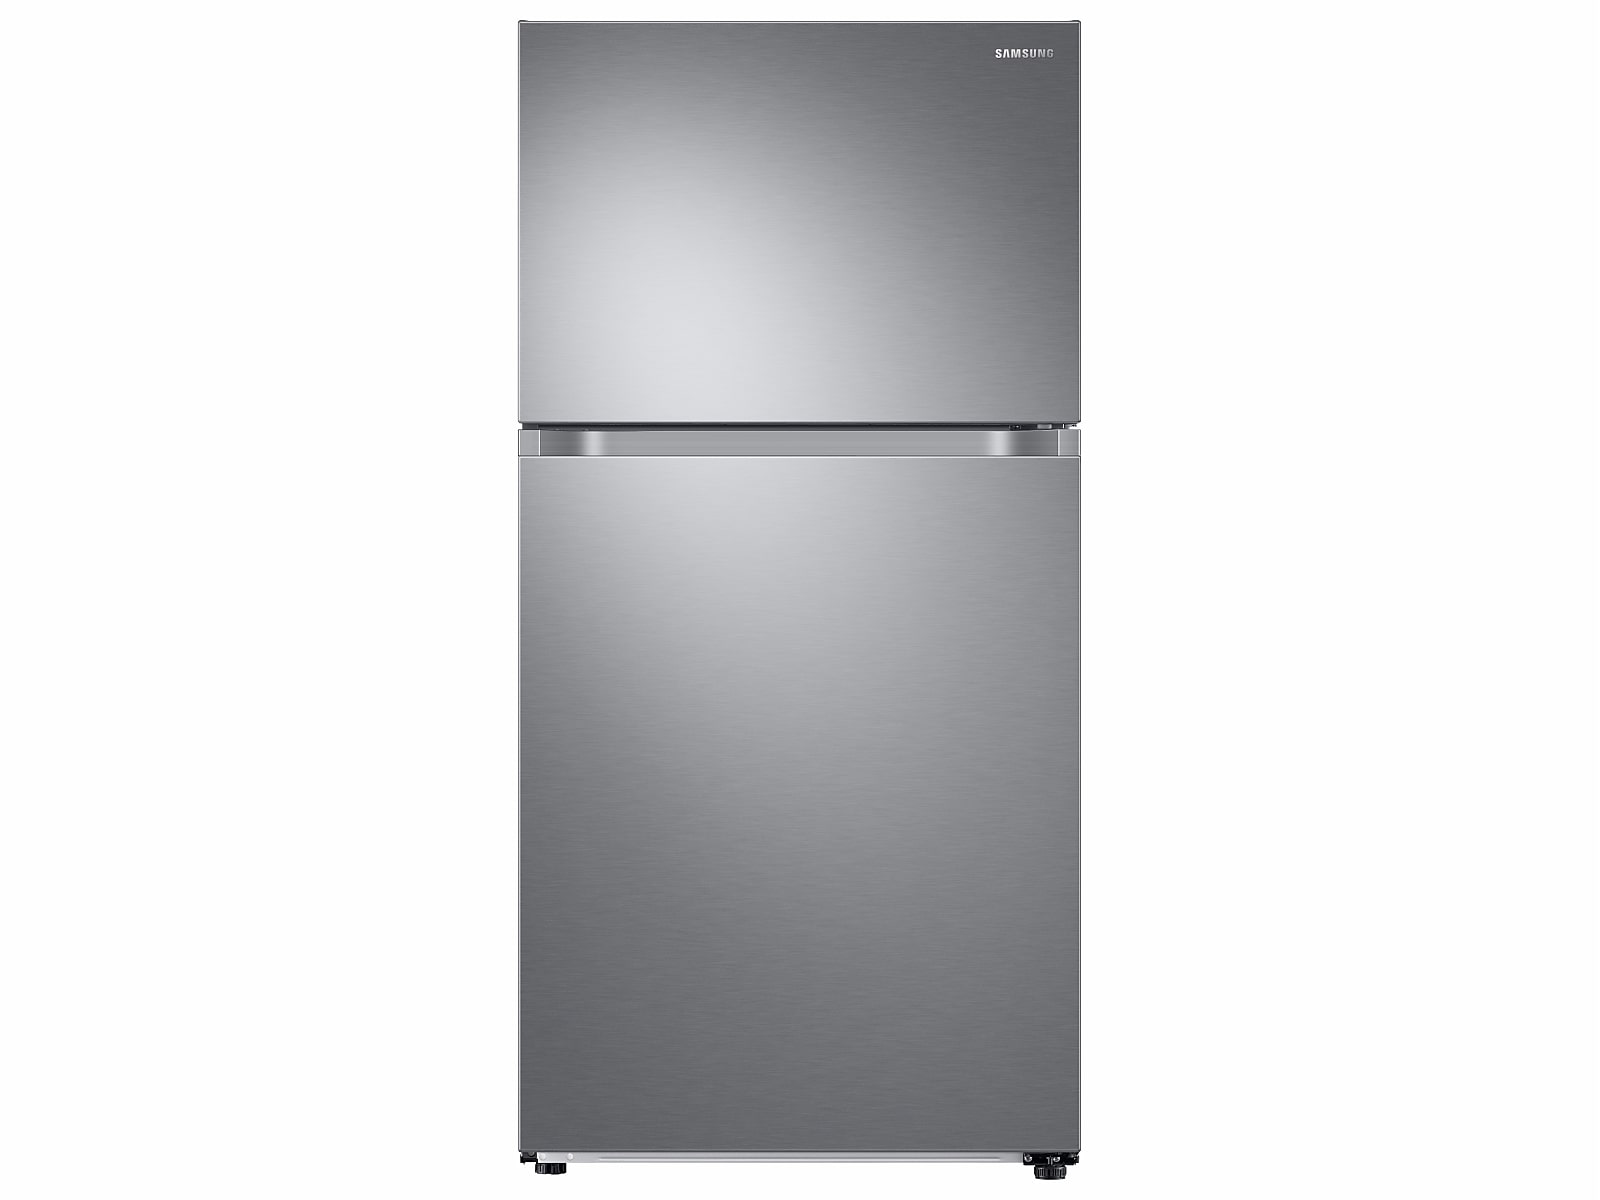 Samsung 21 cu. ft. Top Freezer Refrigerator with FlexZone™ and Ice Maker in Silver(RT21M6215SR/AA)